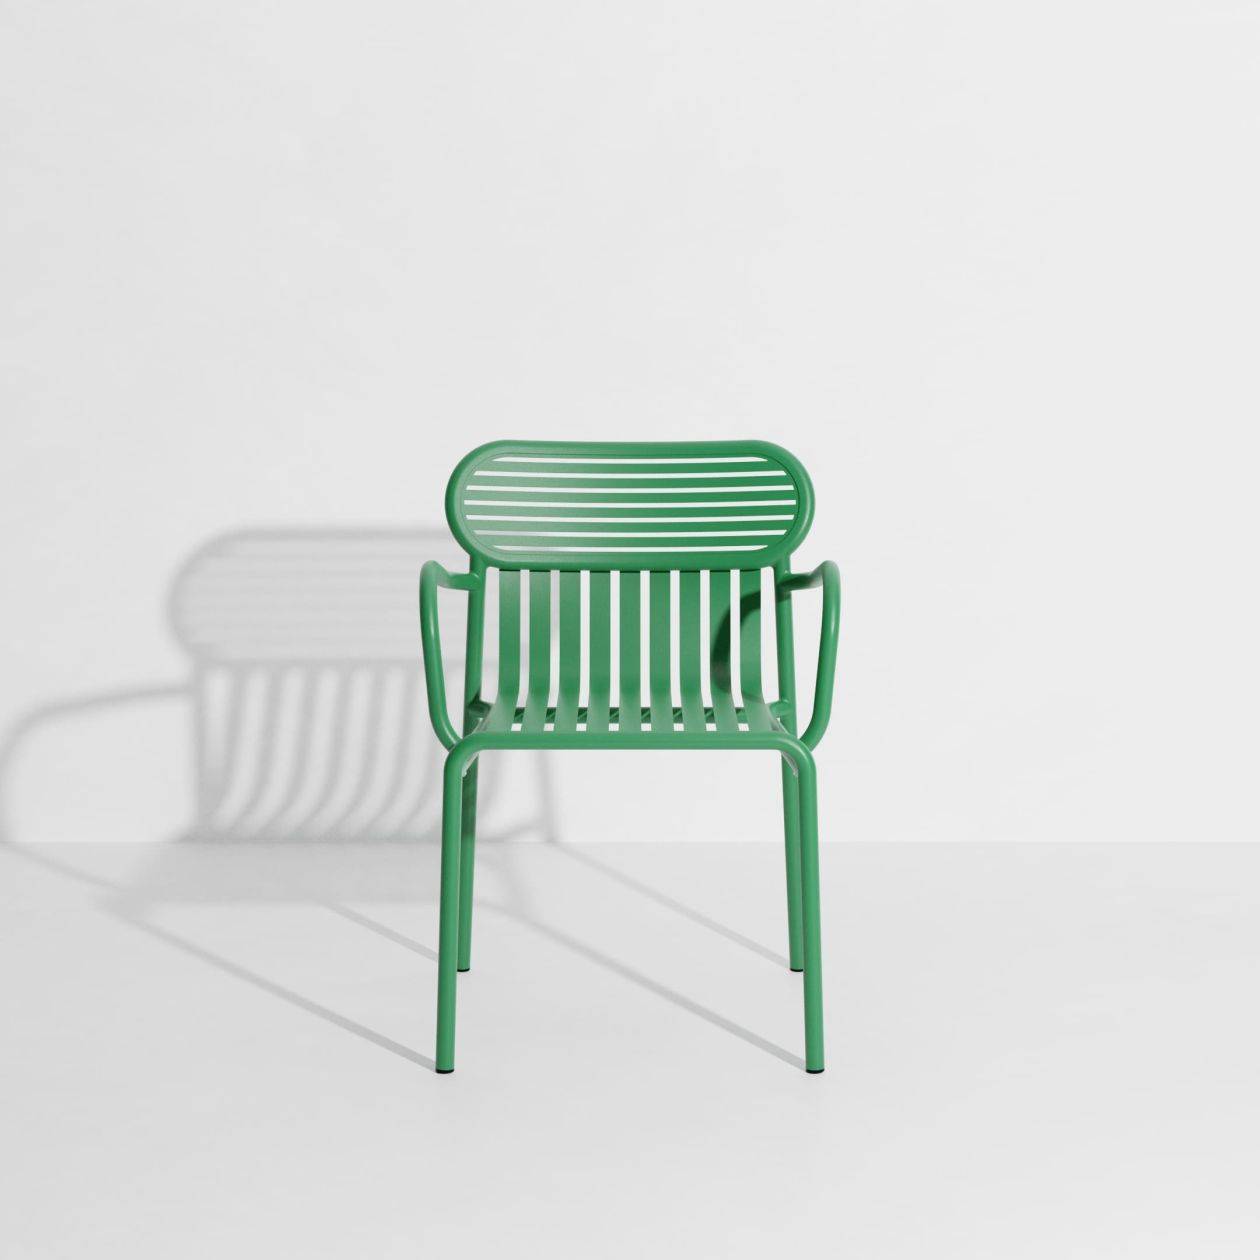 Week-End Garden Chair with armrests - Mint green